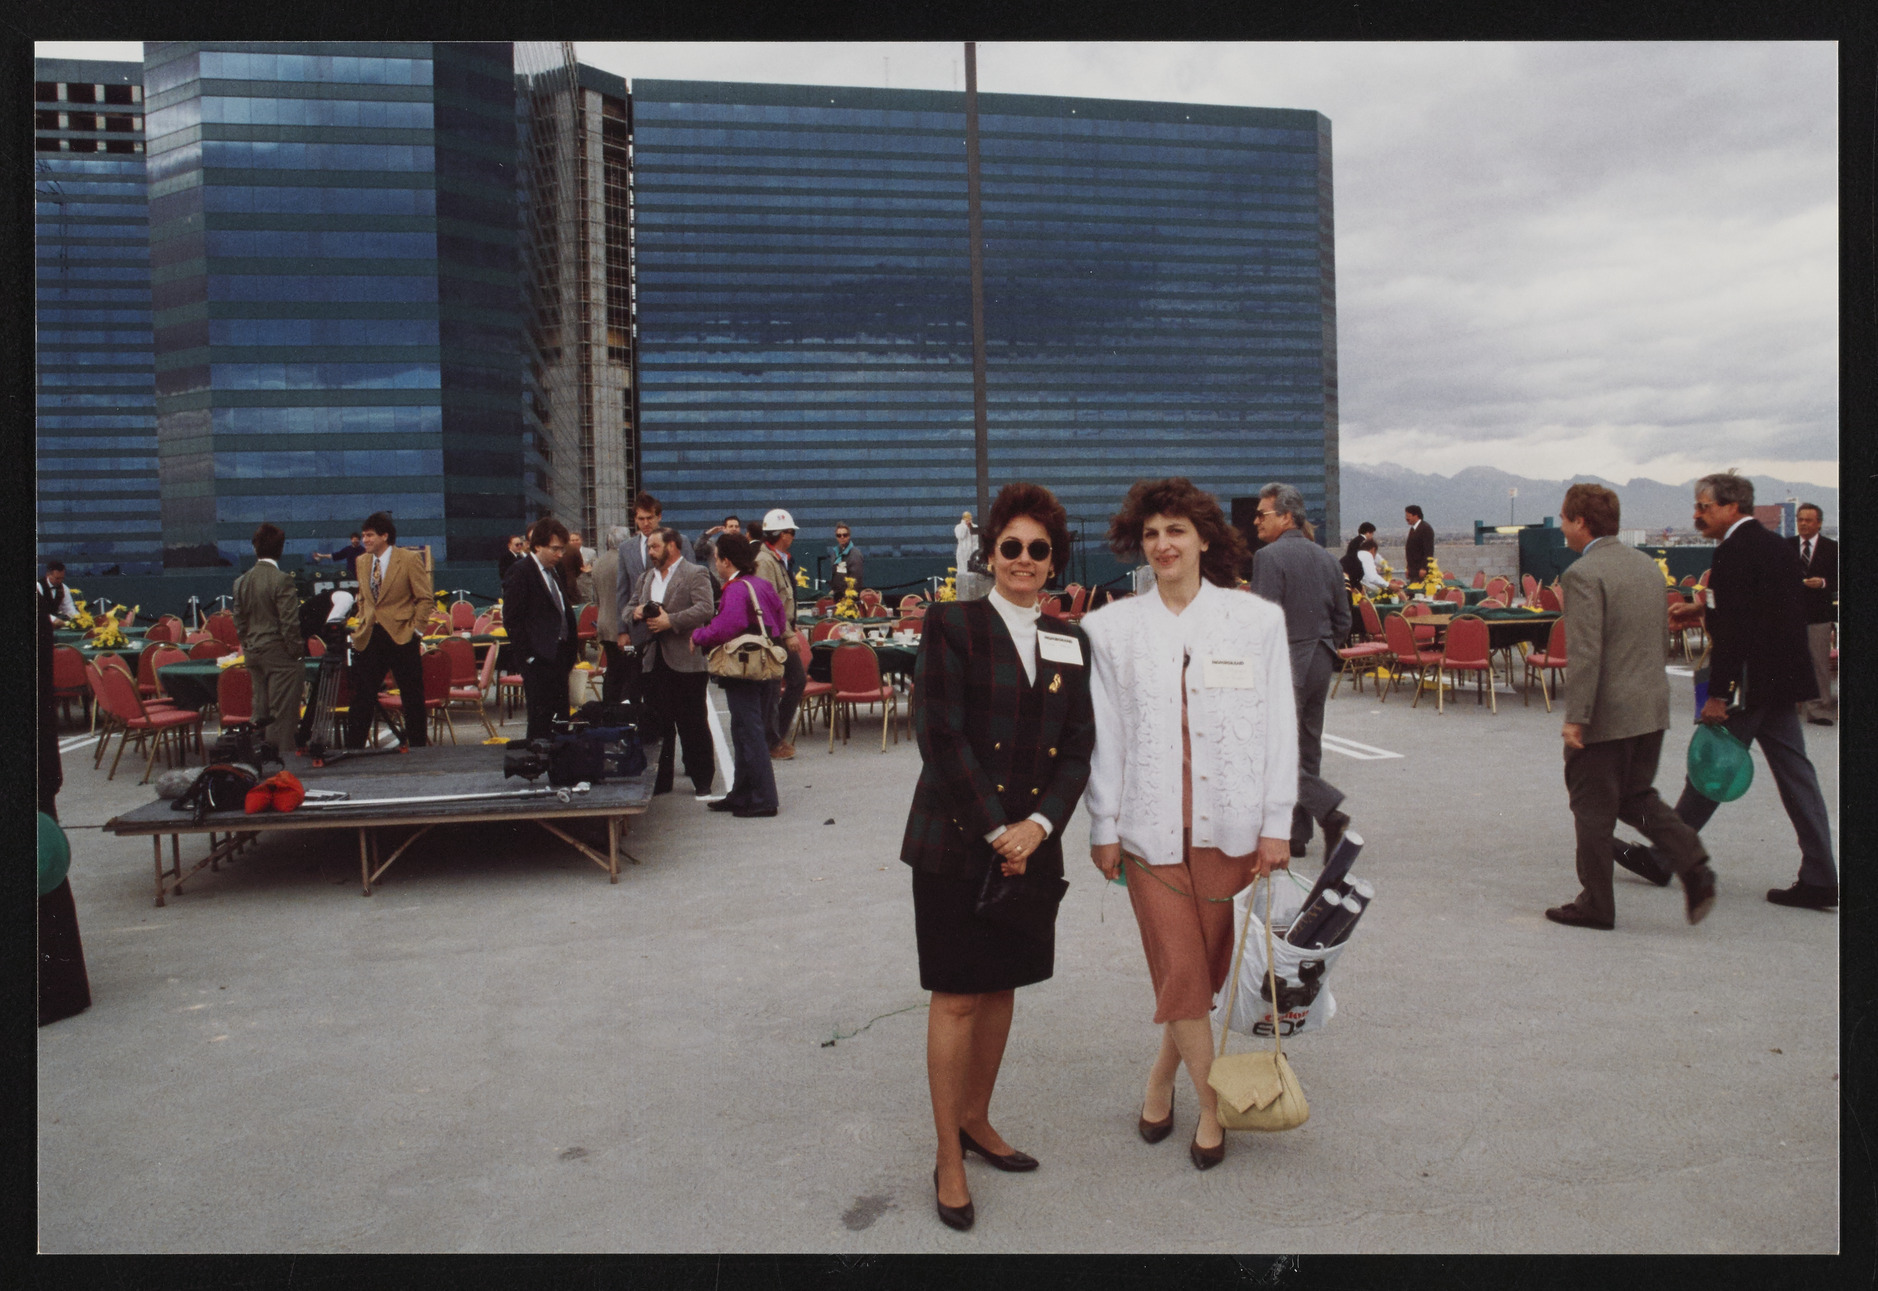 MGM construction party, image 11